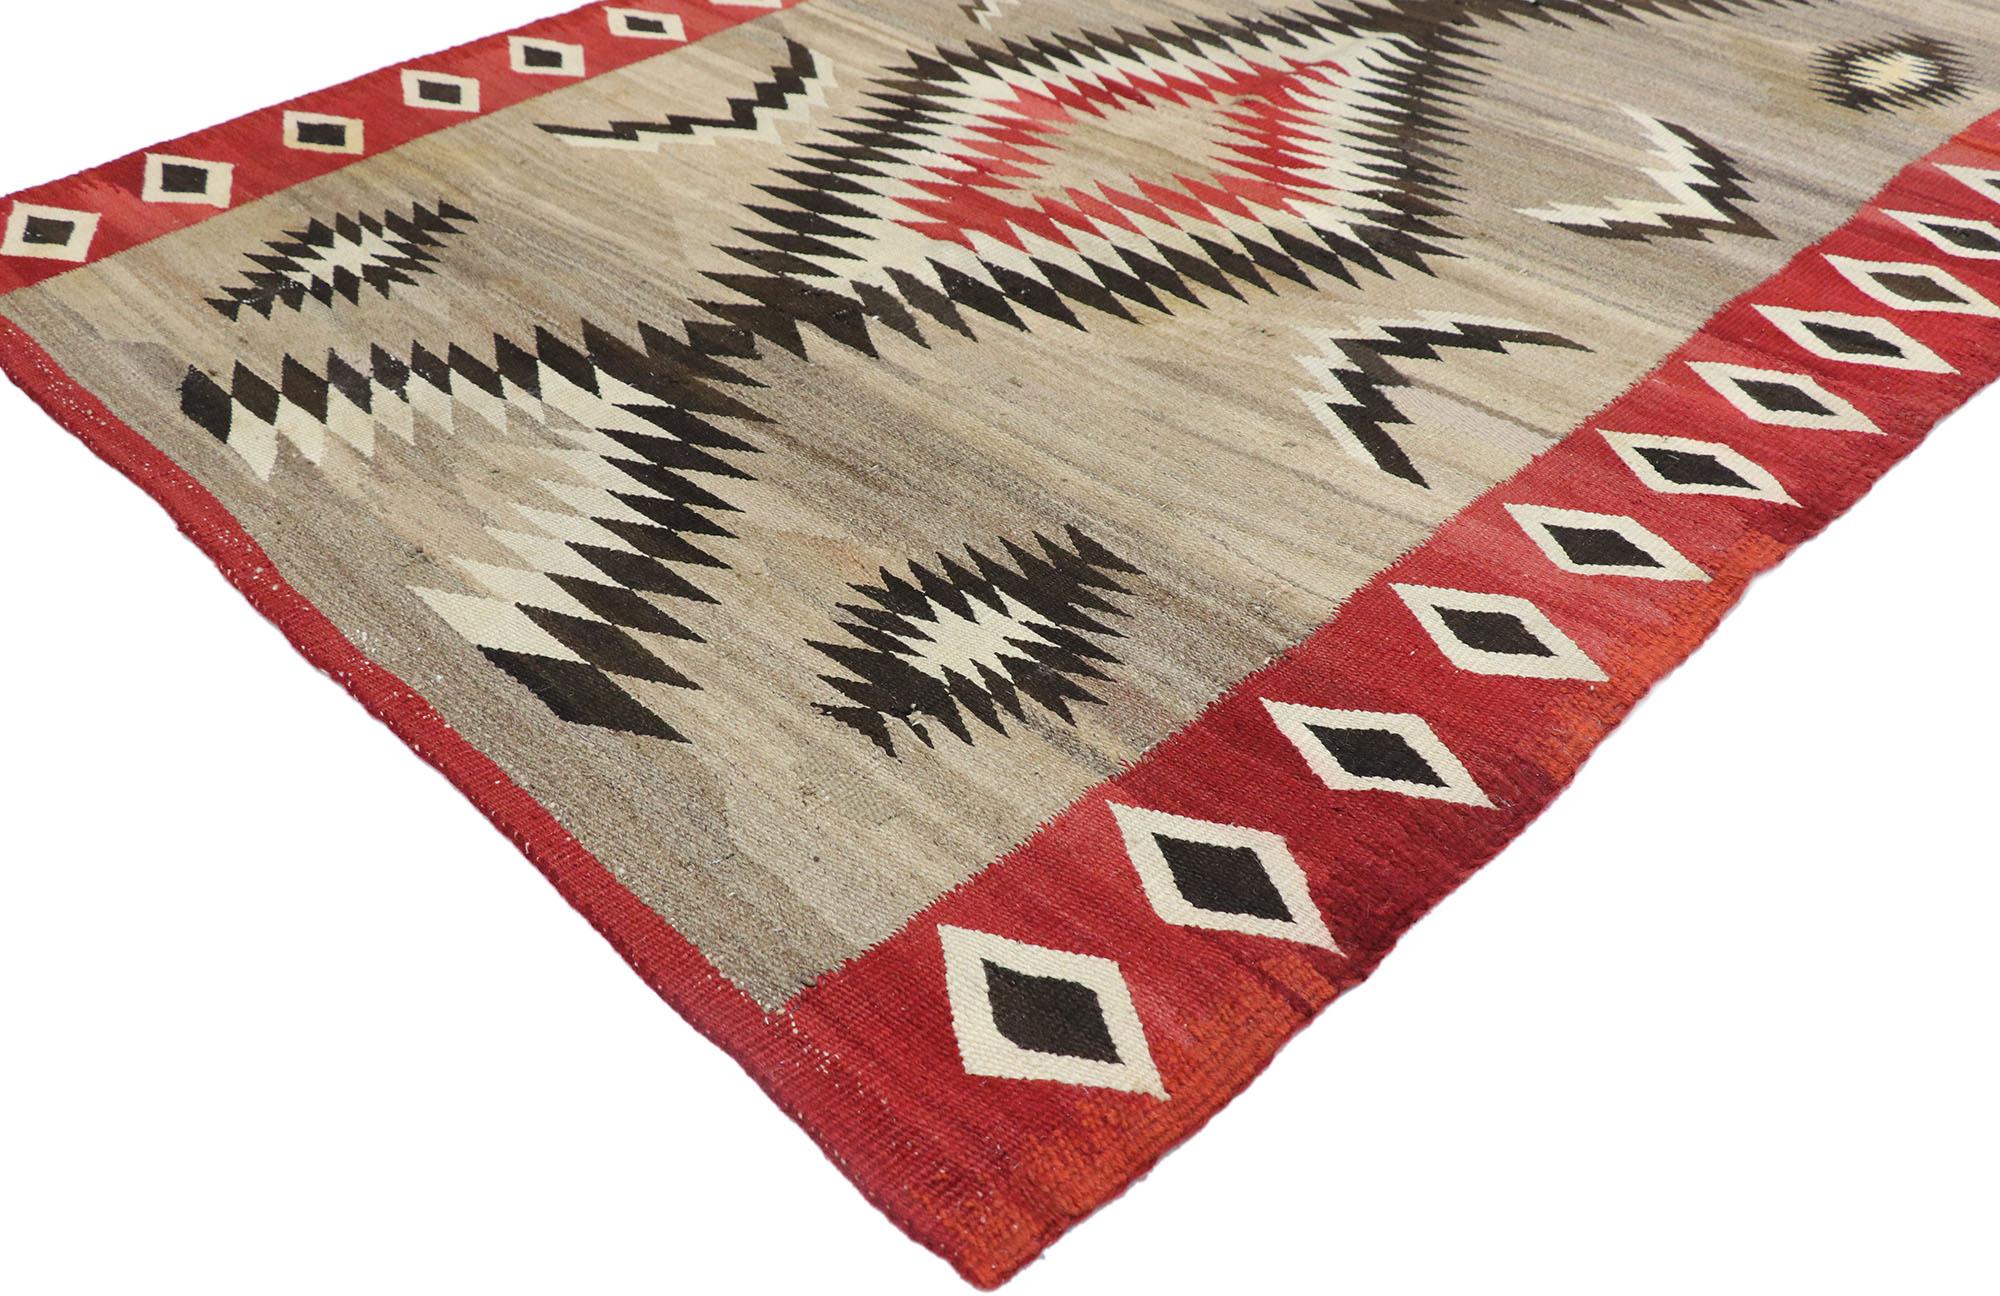 77803 Antique Navajo Eye Dazzler Rug, 04'06 x 06'04. Eye Dazzler Navajo rugs, crafted by the indigenous Navajo people of the Southwestern United States, are renowned for their intricate weaving, vibrant hues, and captivating geometric patterns.